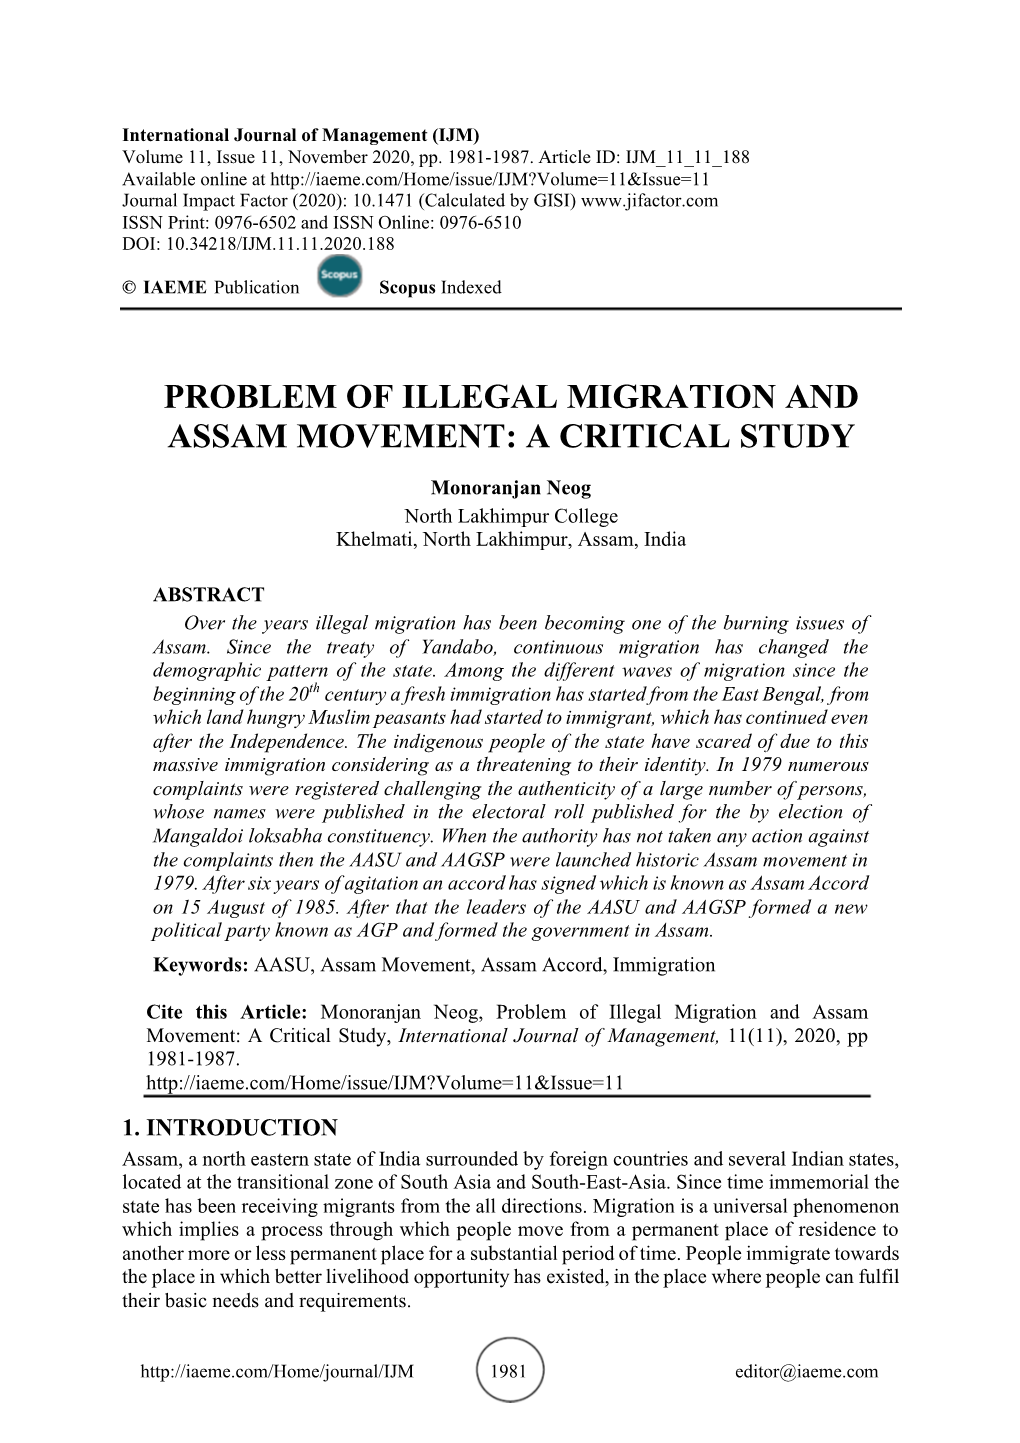 Problem of Illegal Migration and Assam Movement: a Critical Study